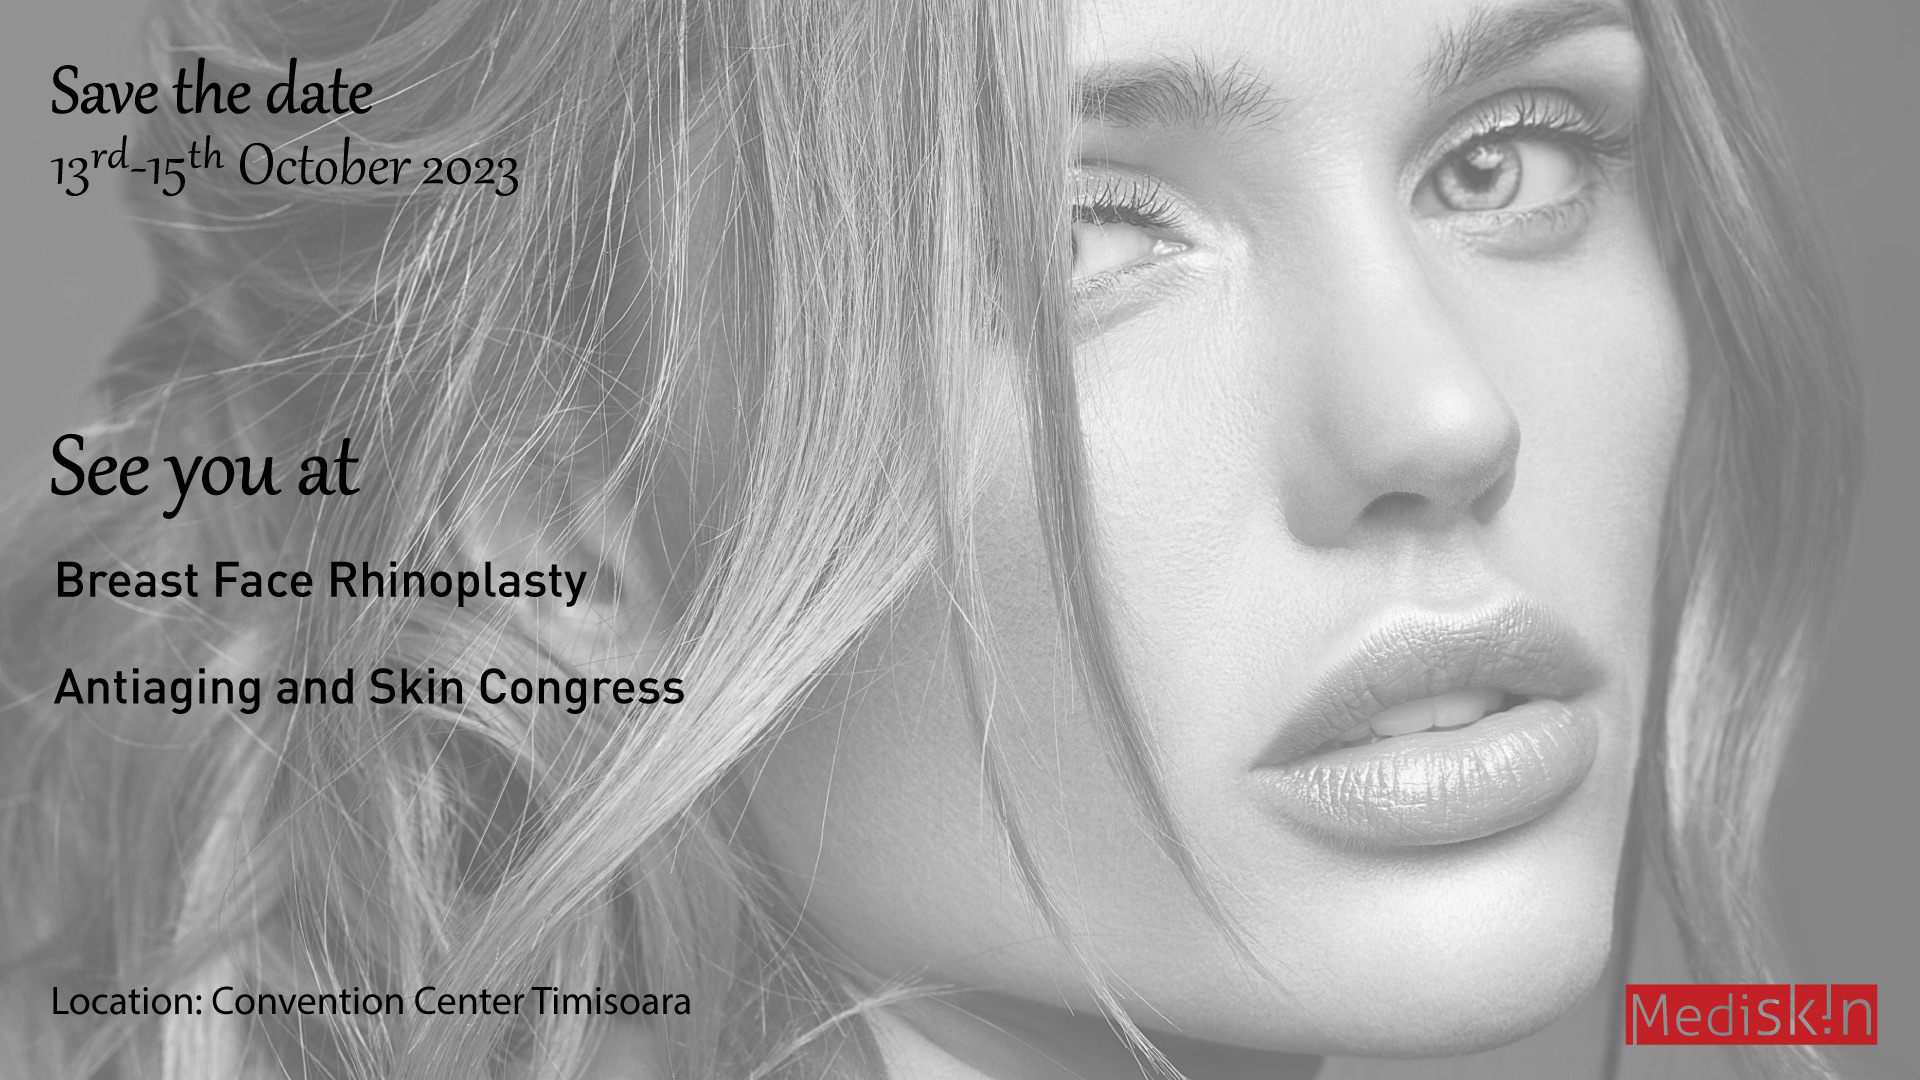 Mediskin at Breast Face Rhinoplasty Antiaging and Skin Congress